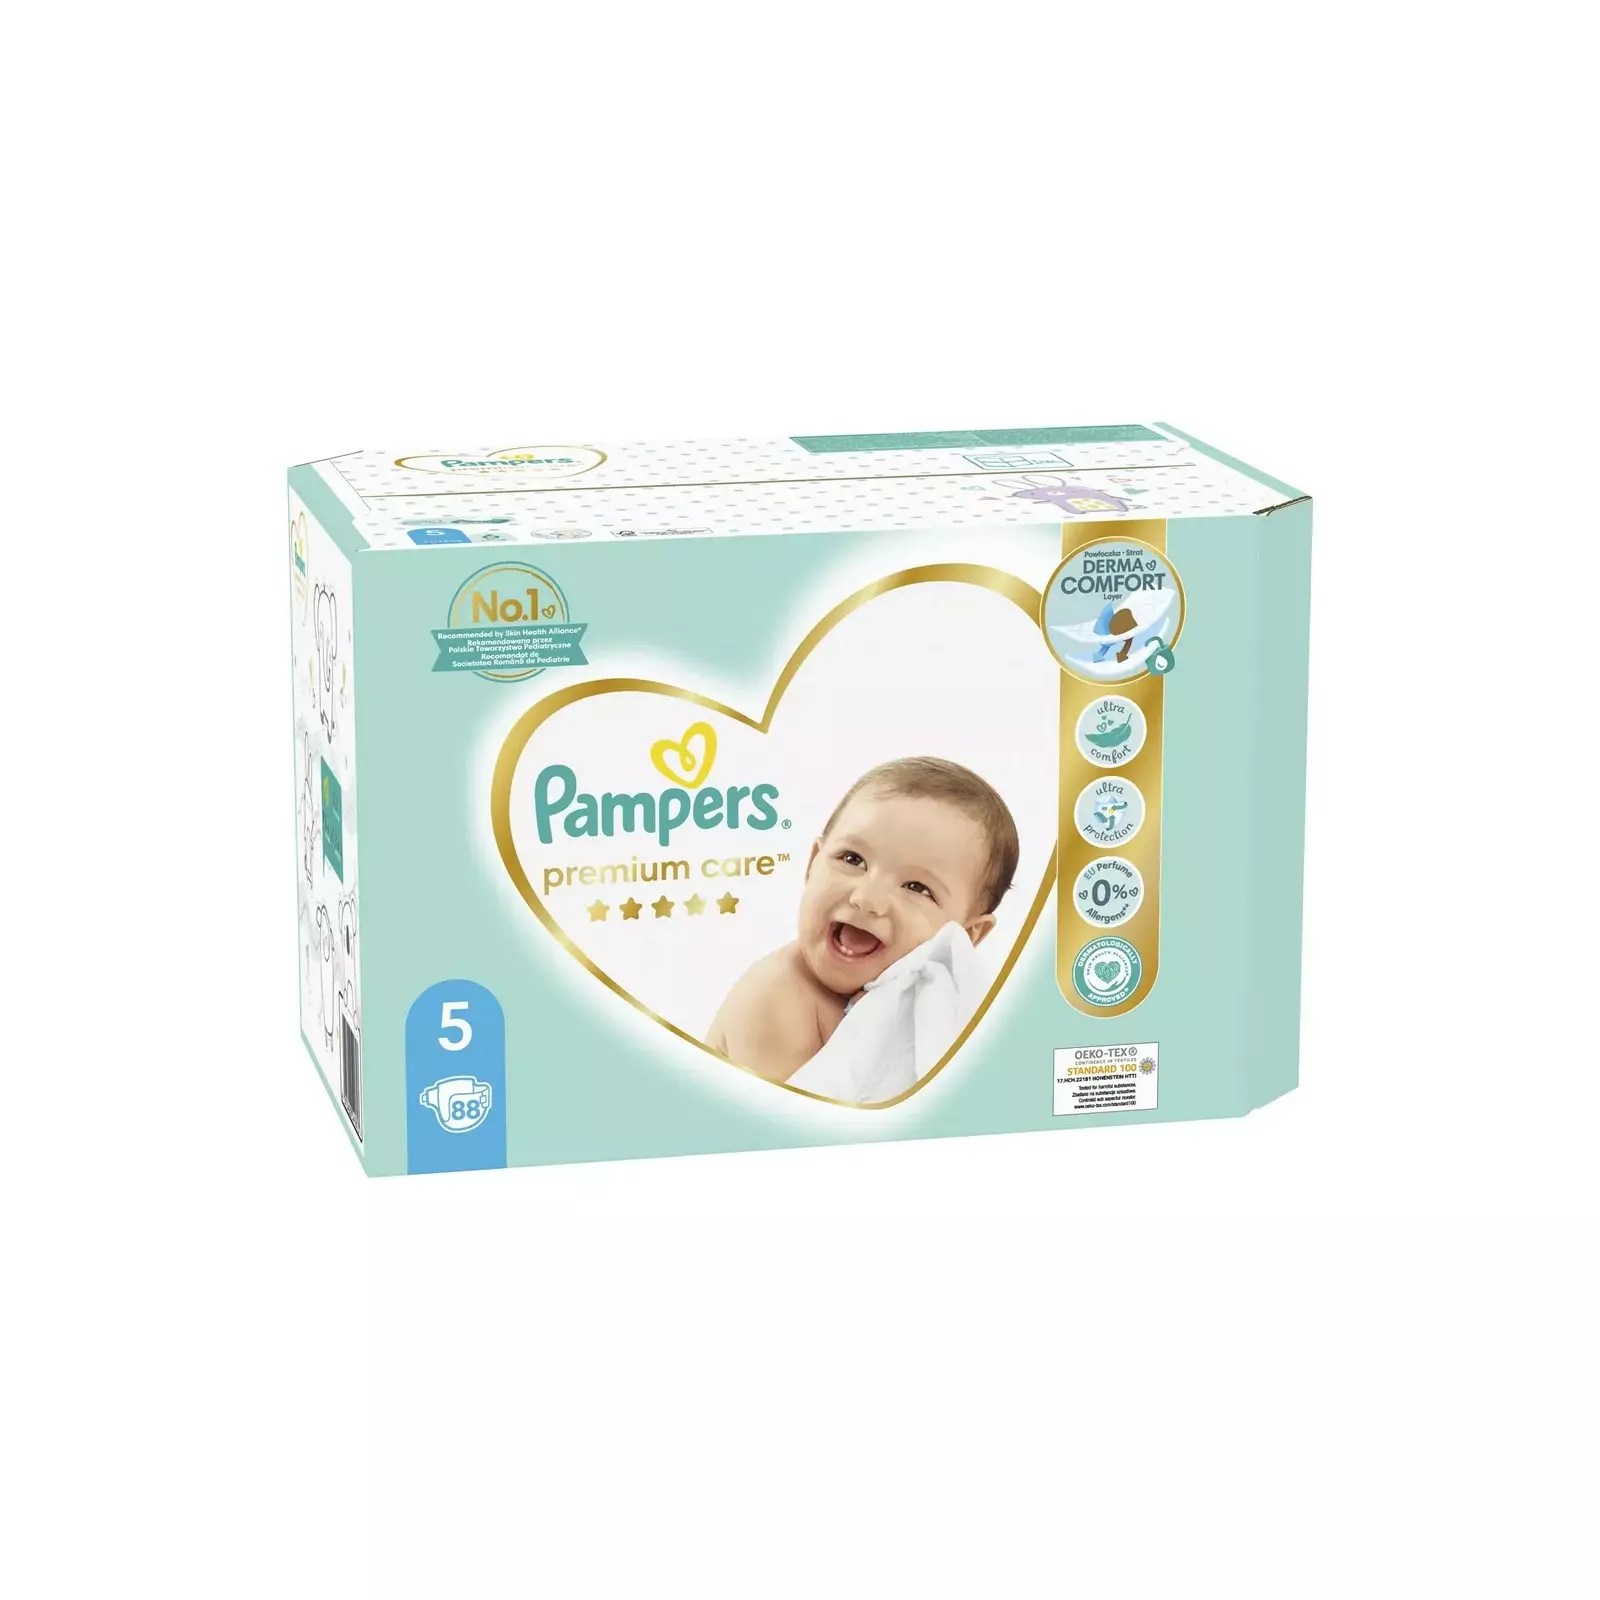 Pampers Photo 5